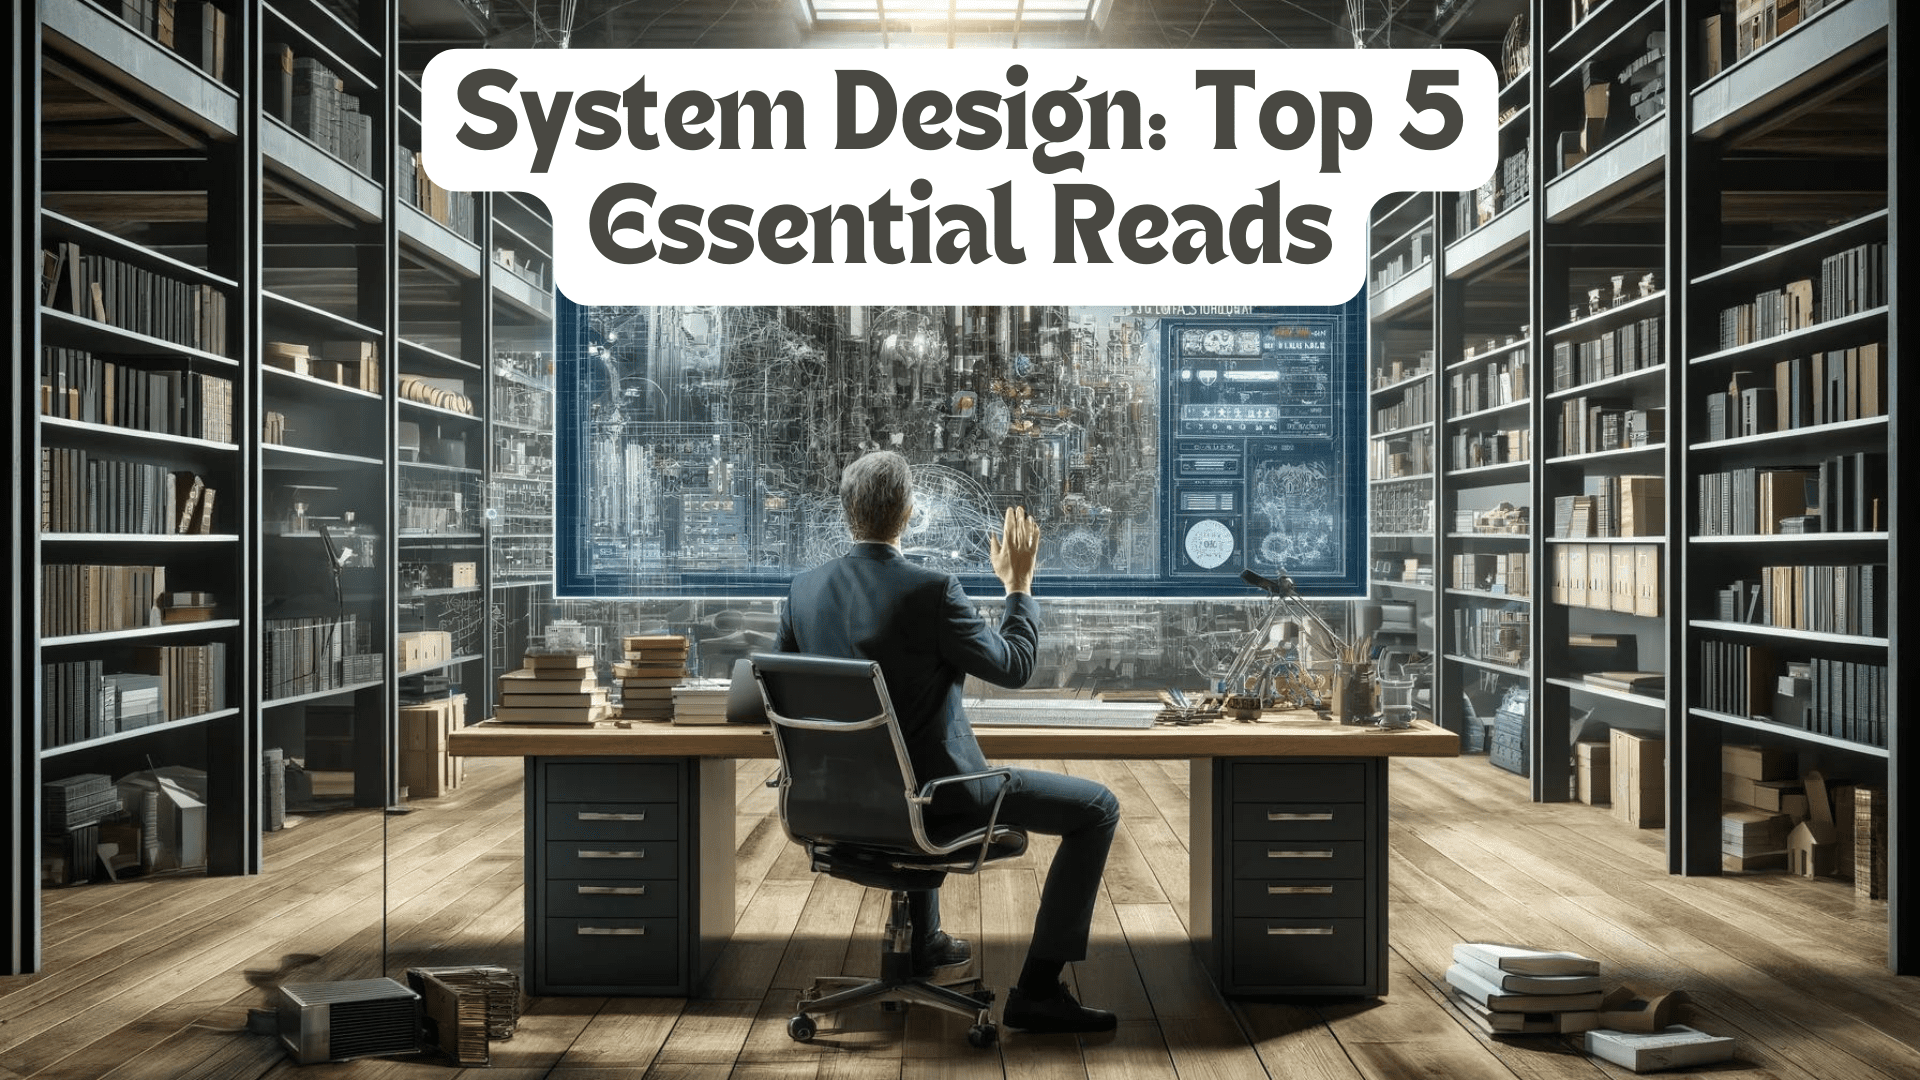 Learning Systems Design: Top 5 Essential Readings